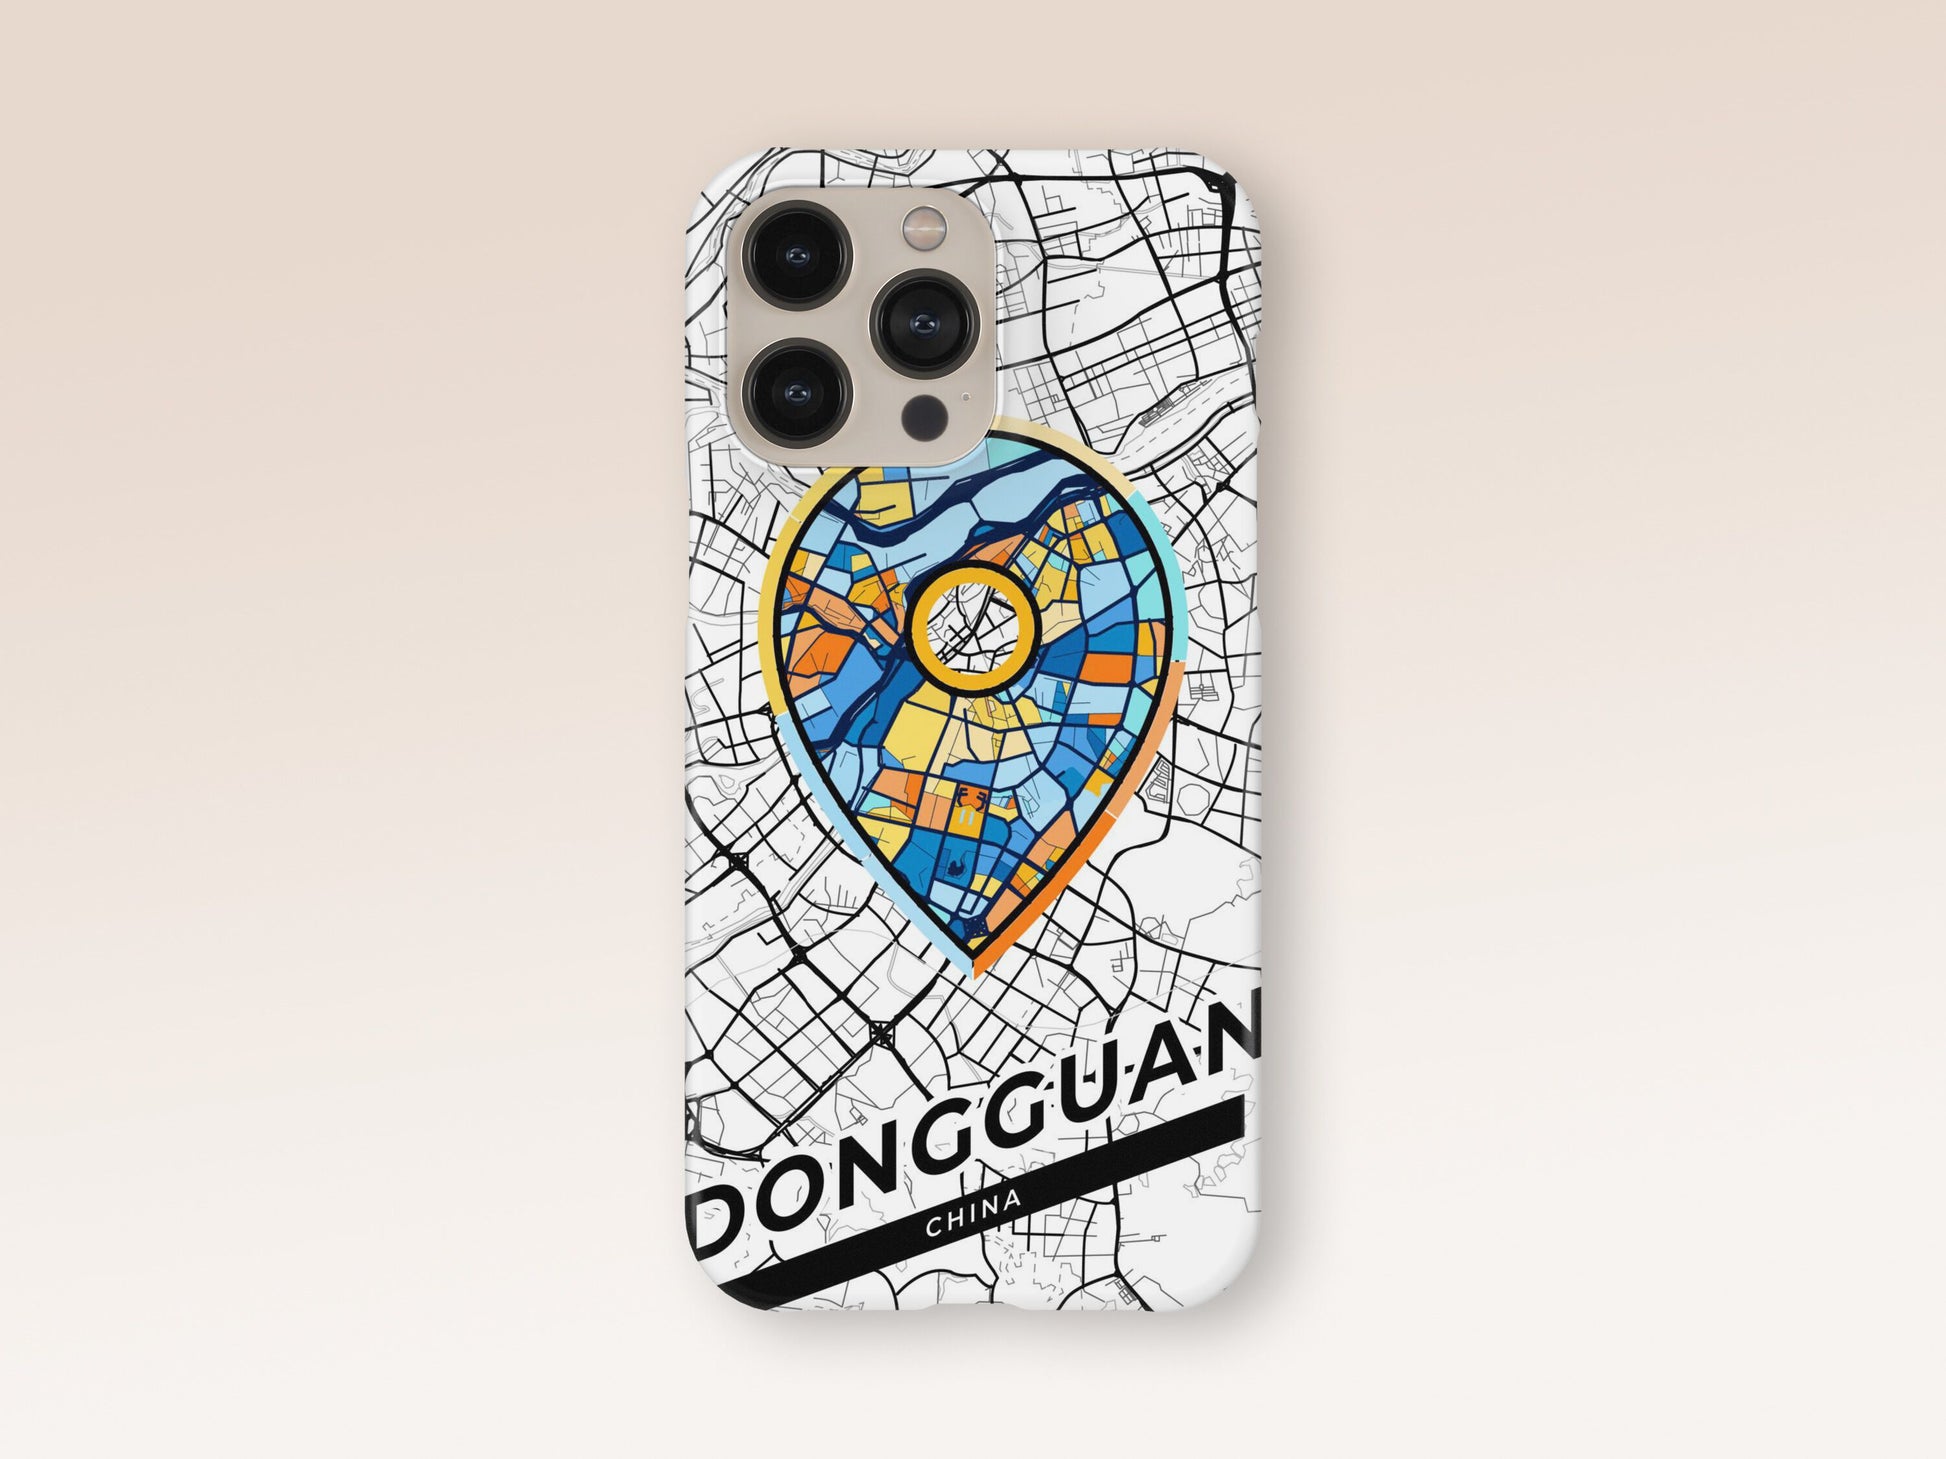 Dongguan China slim phone case with colorful icon. Birthday, wedding or housewarming gift. Couple match cases. 1